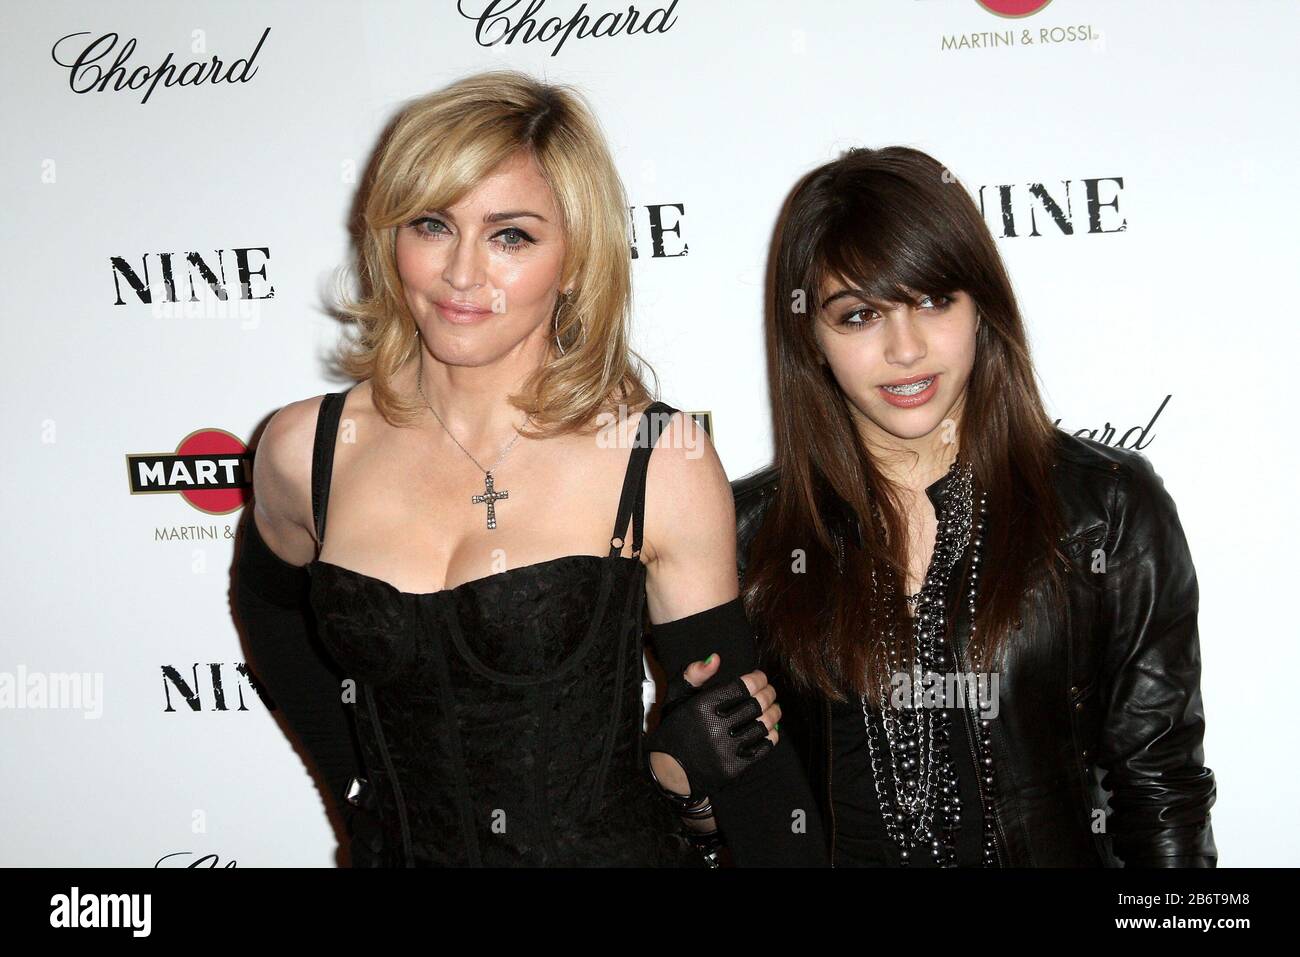 New York, NY, USA. 15 December, 2009. Madonna, Lourdes Leon at the premiere of NINE at the Ziegfield Theater. Credit: Steve Mack/Alamy Stock Photo